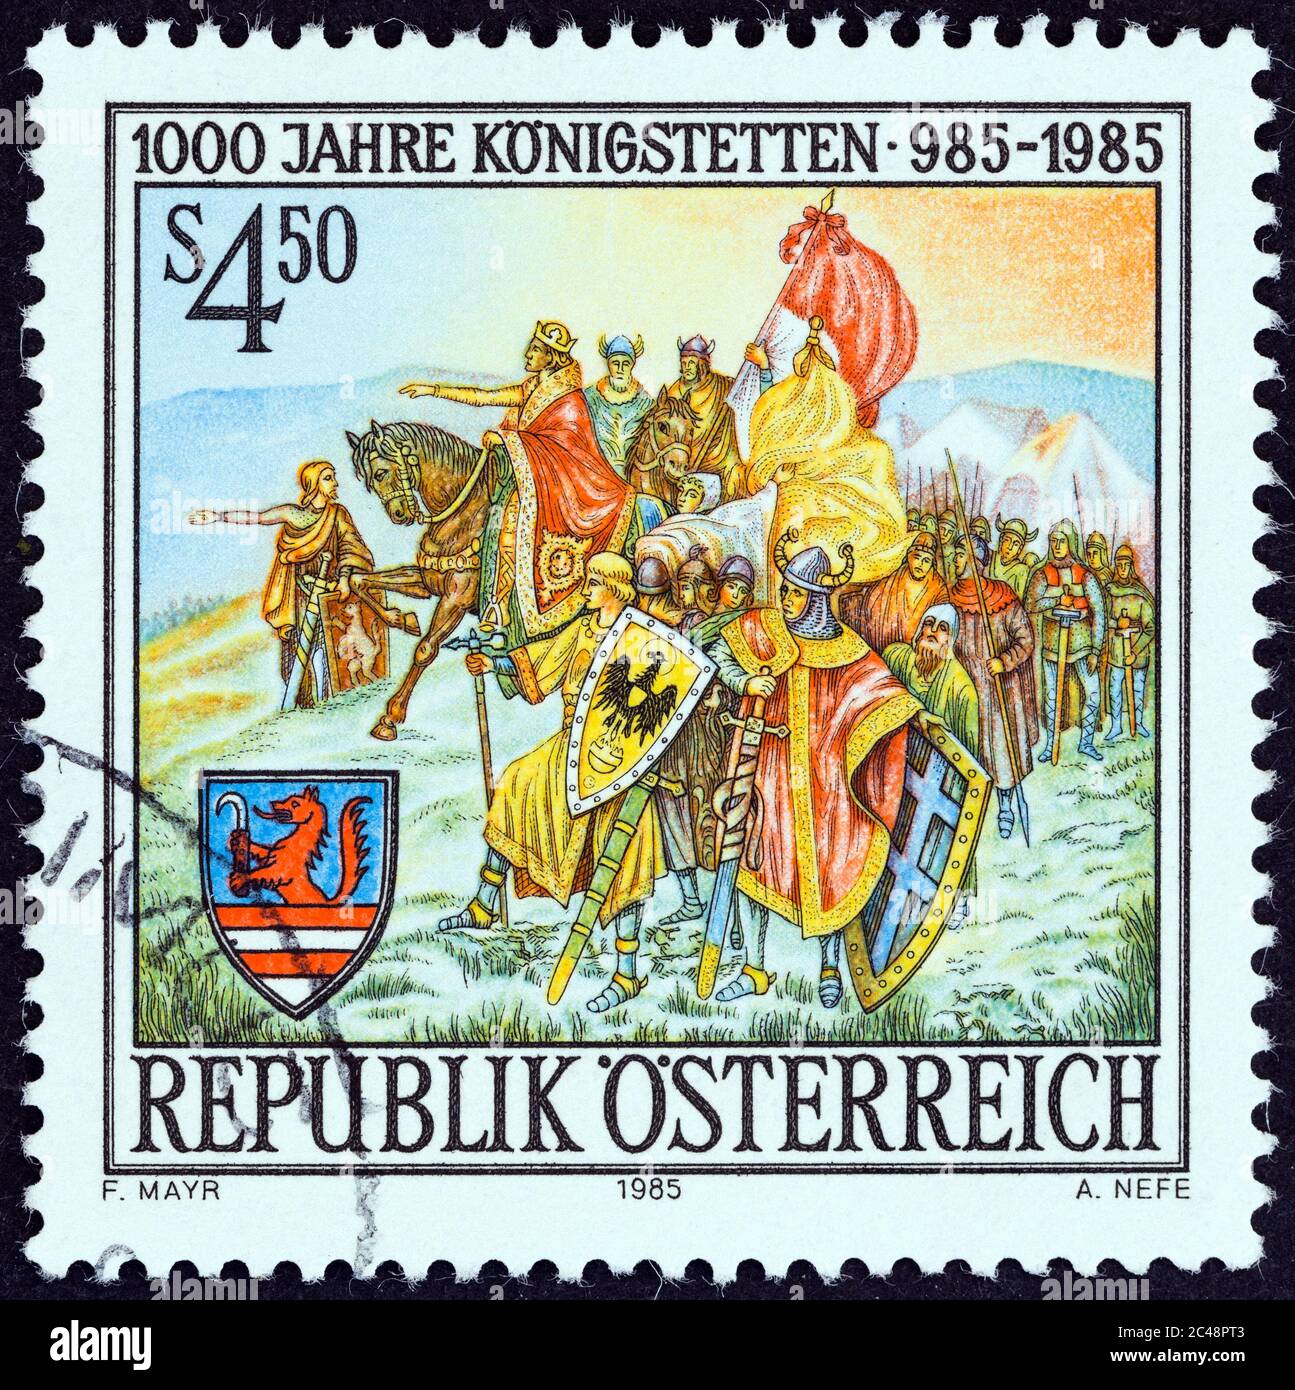 AUSTRIA - CIRCA 1985: A stamp printed in Austria shows legendary founding of Koningstetten by Charlemagne, circa 1985. Stock Photo